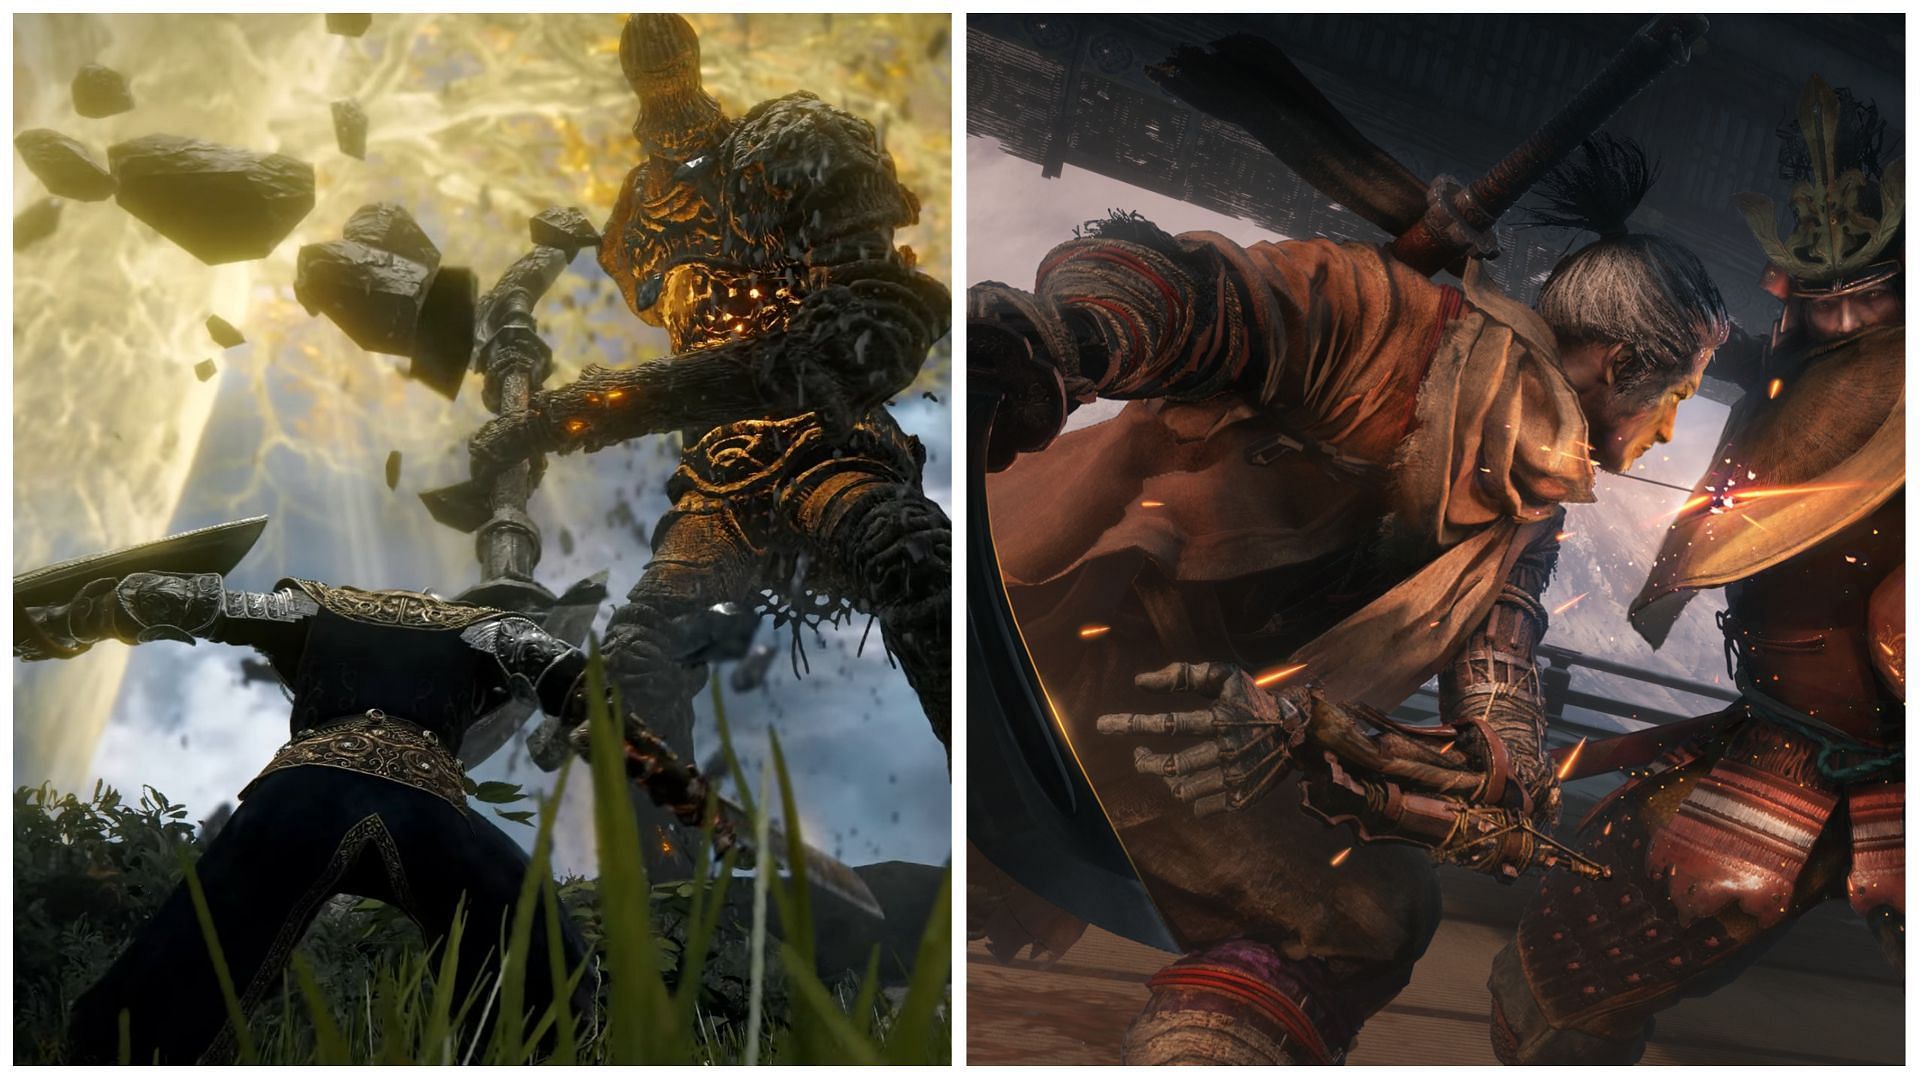 Elden Ring and Sekiro are two of the best games in the action RPG genre (Images via Bandai Namco and Activision)